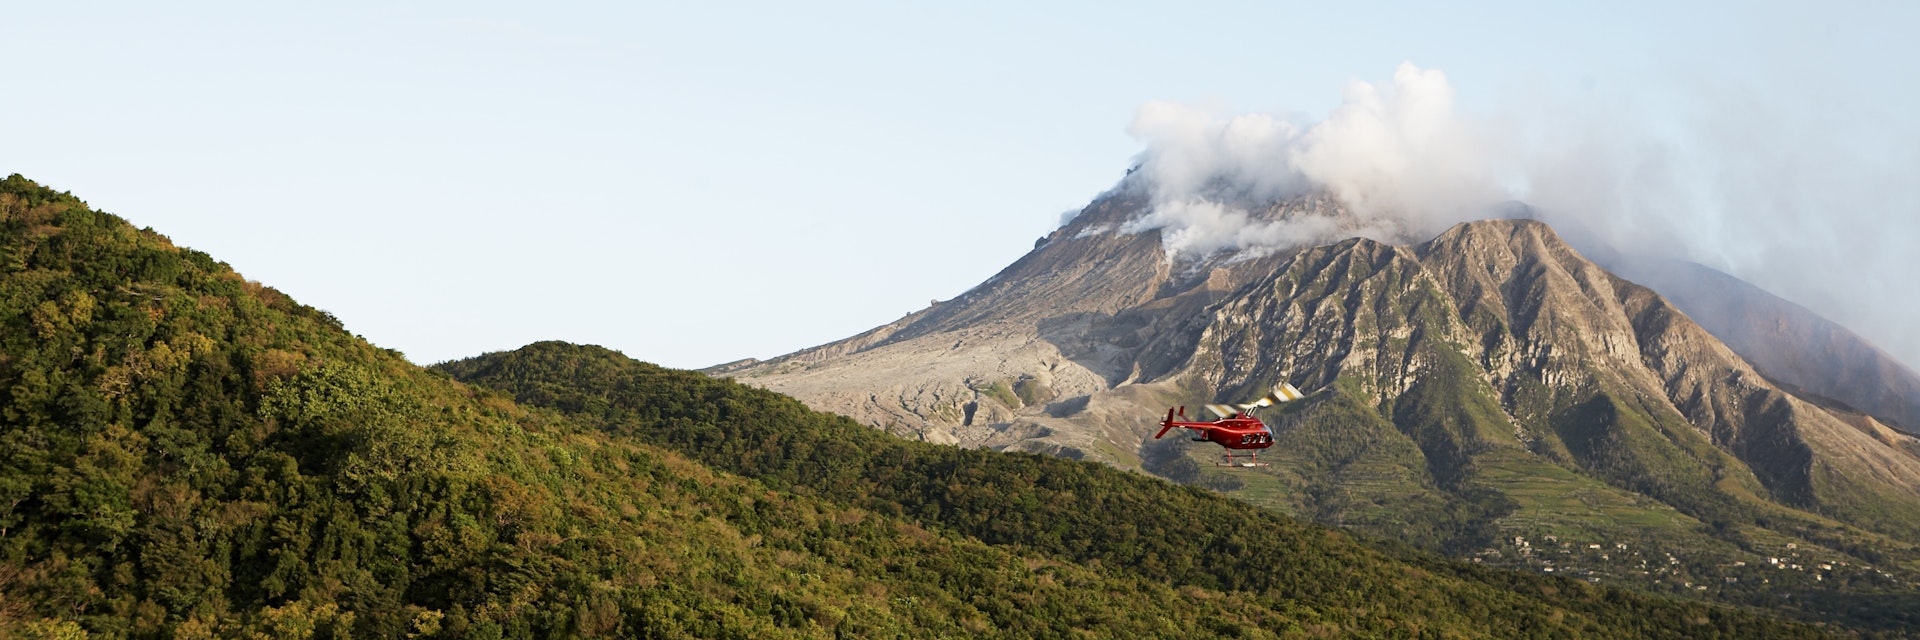 Helicopter flying near Soufriere Hills volcano.